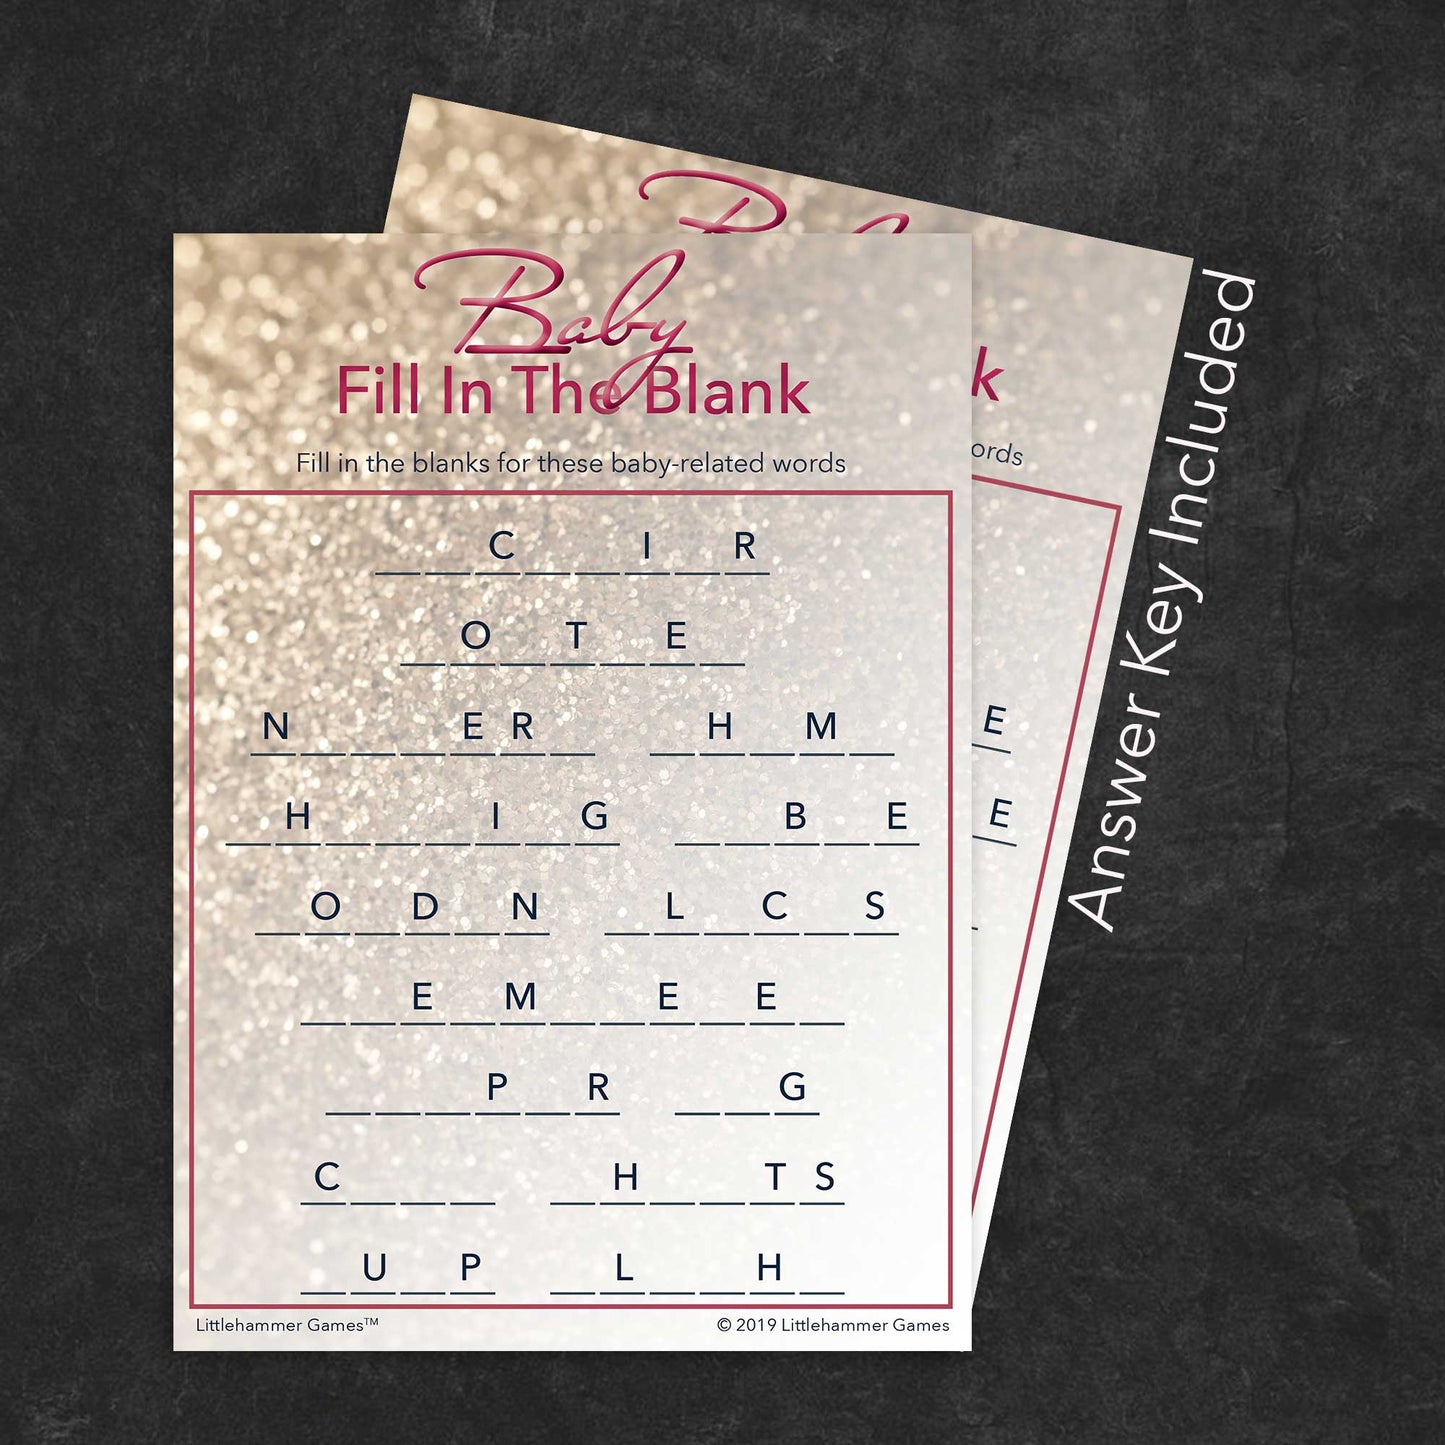 Baby Fill in the Blank game card with a glittery rose gold background with answer card tucked behind it on a slate background with white text that says "Answer Key Included"